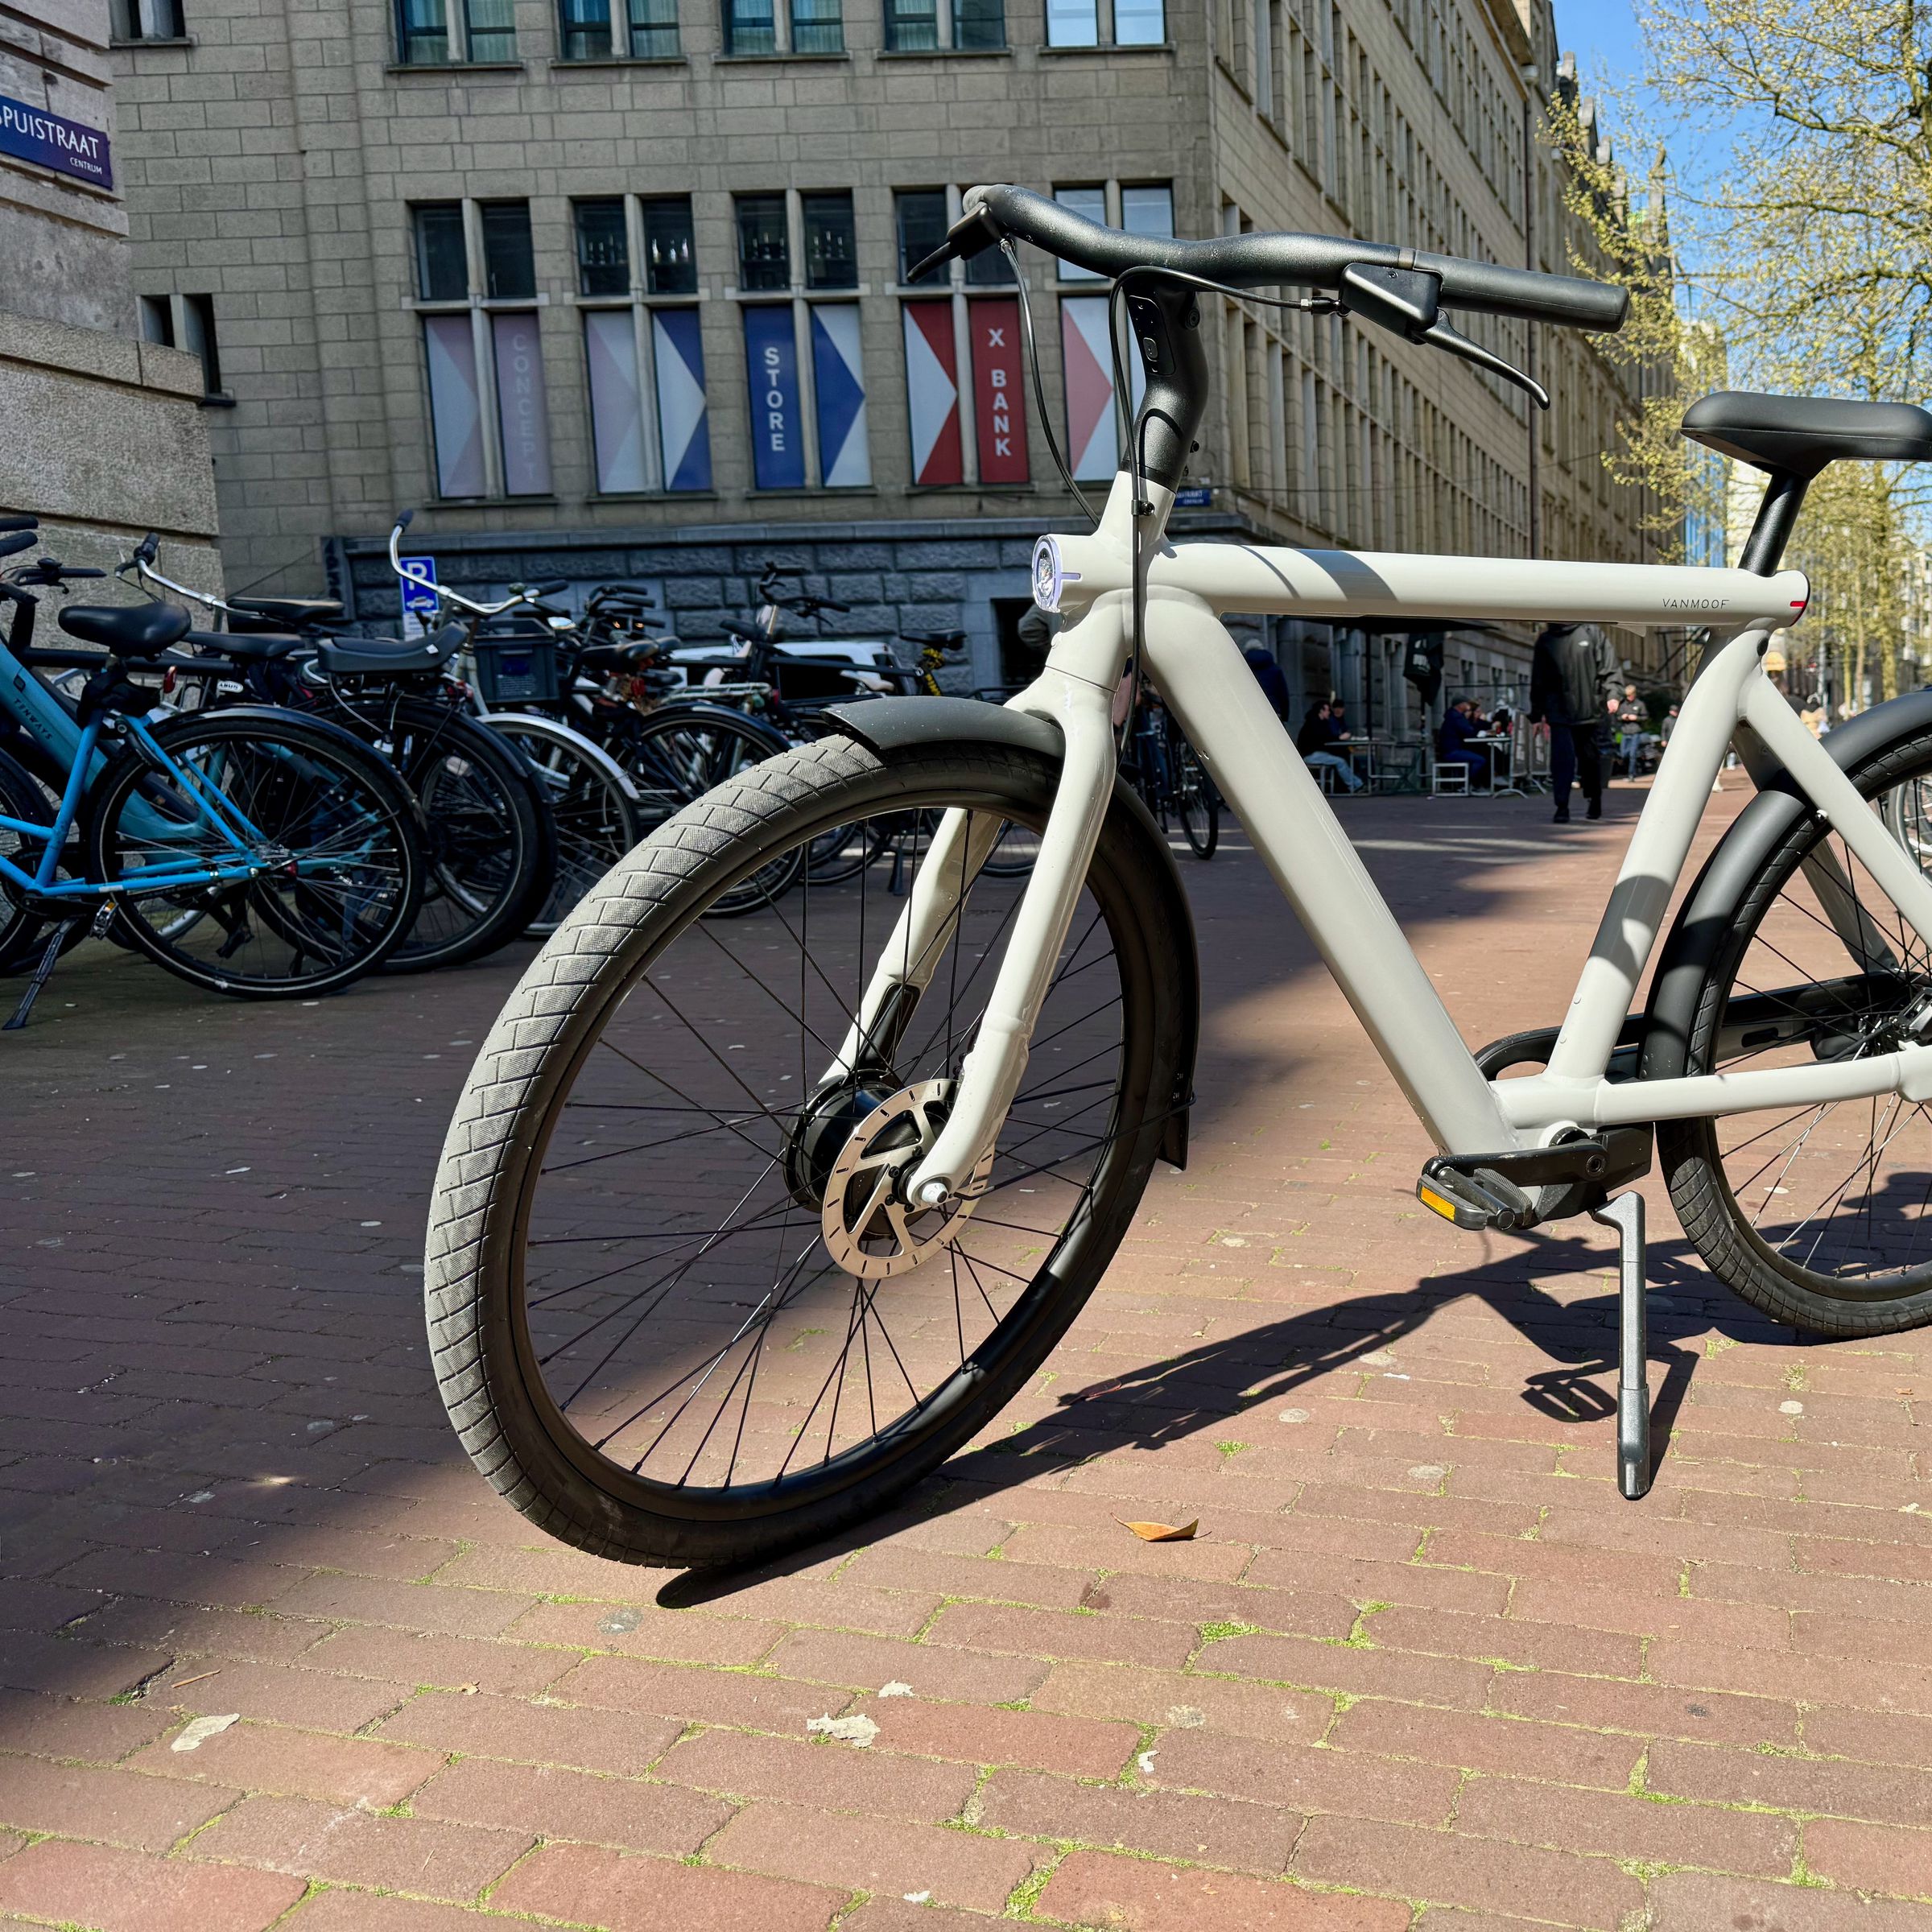 A light grey VanMoof S5 e-bikes sits on a brick sidewalk in Amsterdam between two long rows of bicycles.